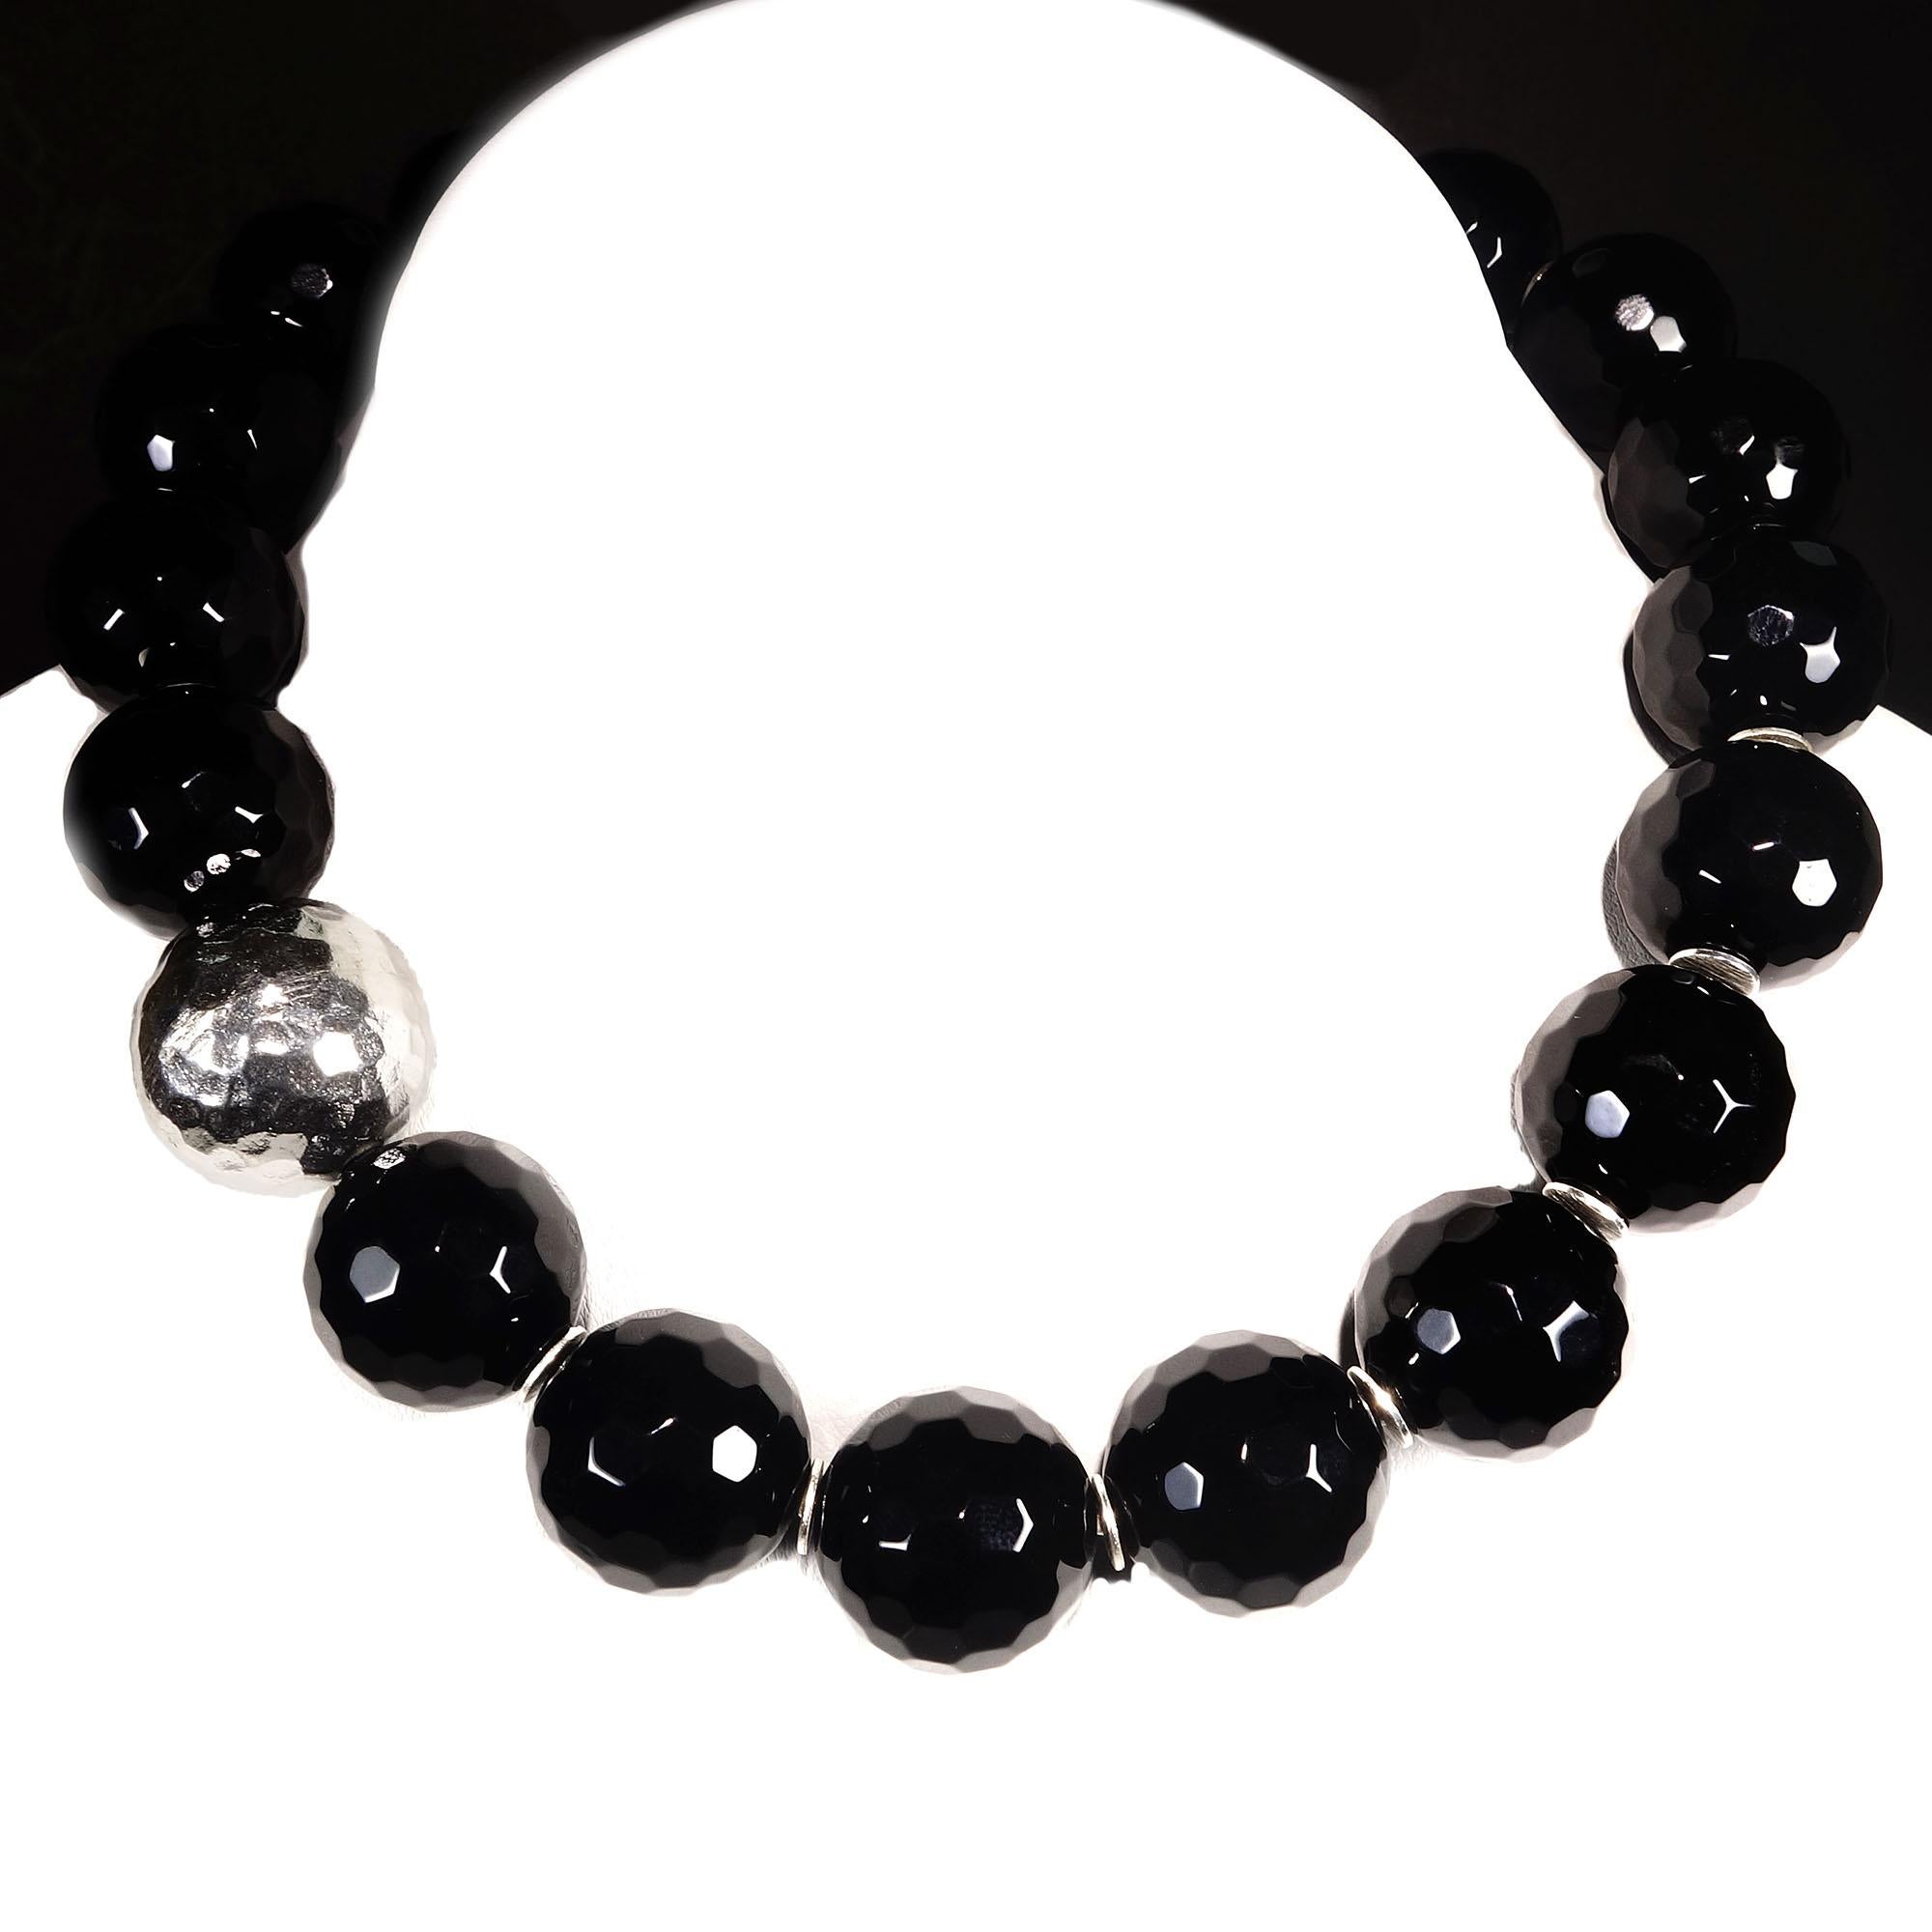 Contemporary AJD Elegant Necklace of Black Onyx with Pure Silver Focal